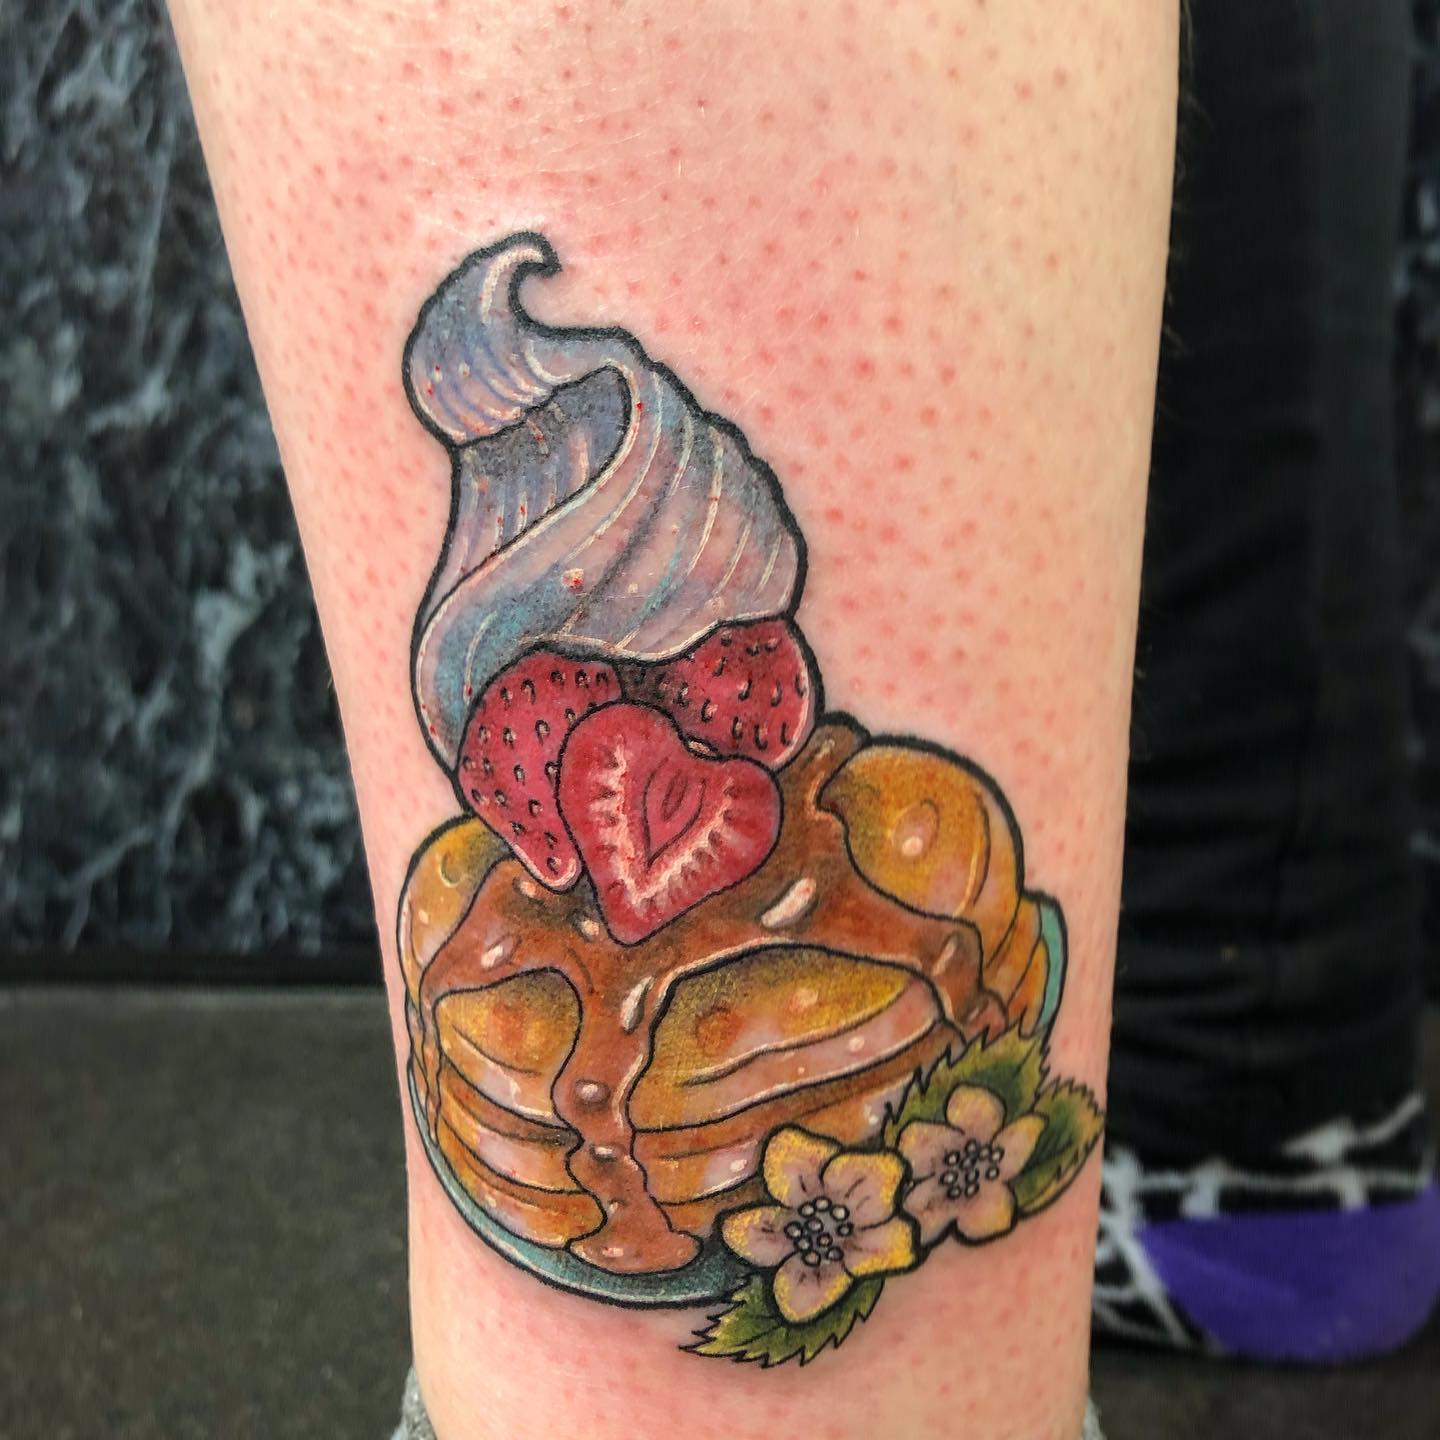 Delicious Strawberry Pancakes for Robyn from my wanna dos. Always up for tattooing the best breakfast foods! 

                